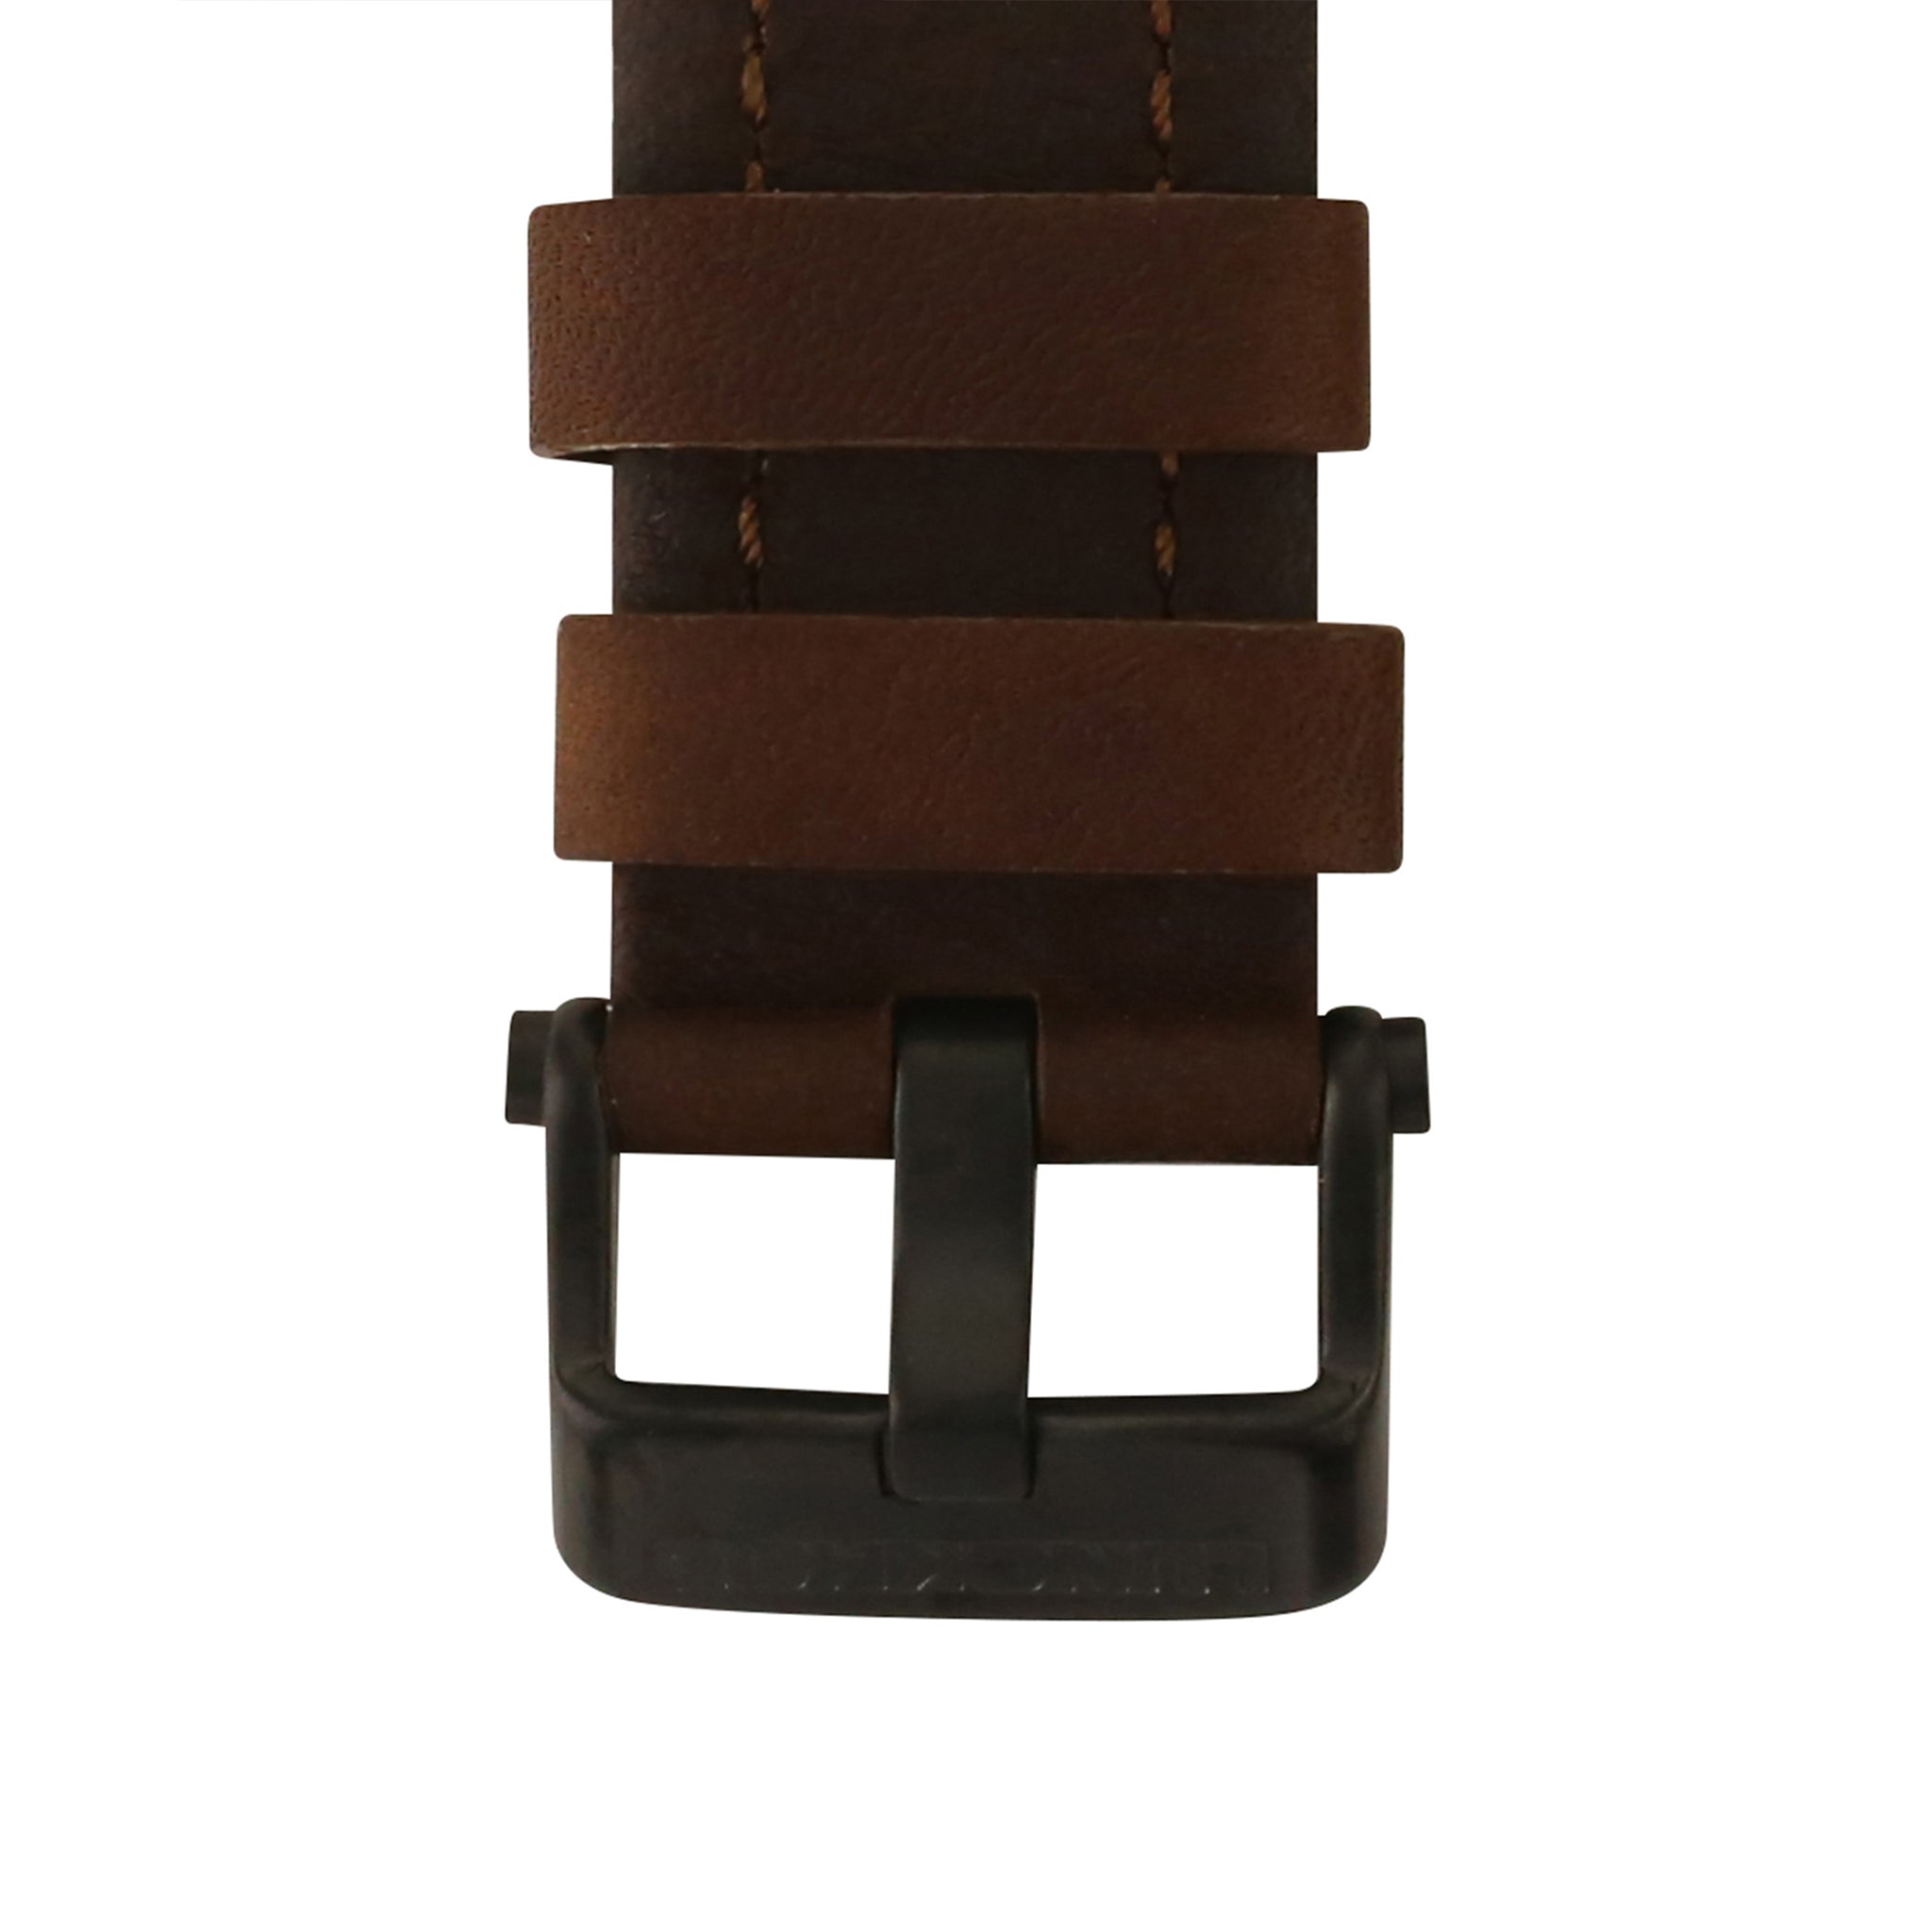 LUNOKHOD BROWN & BROWN LEATHER STRAP 25mm - BLACK BUCKLE